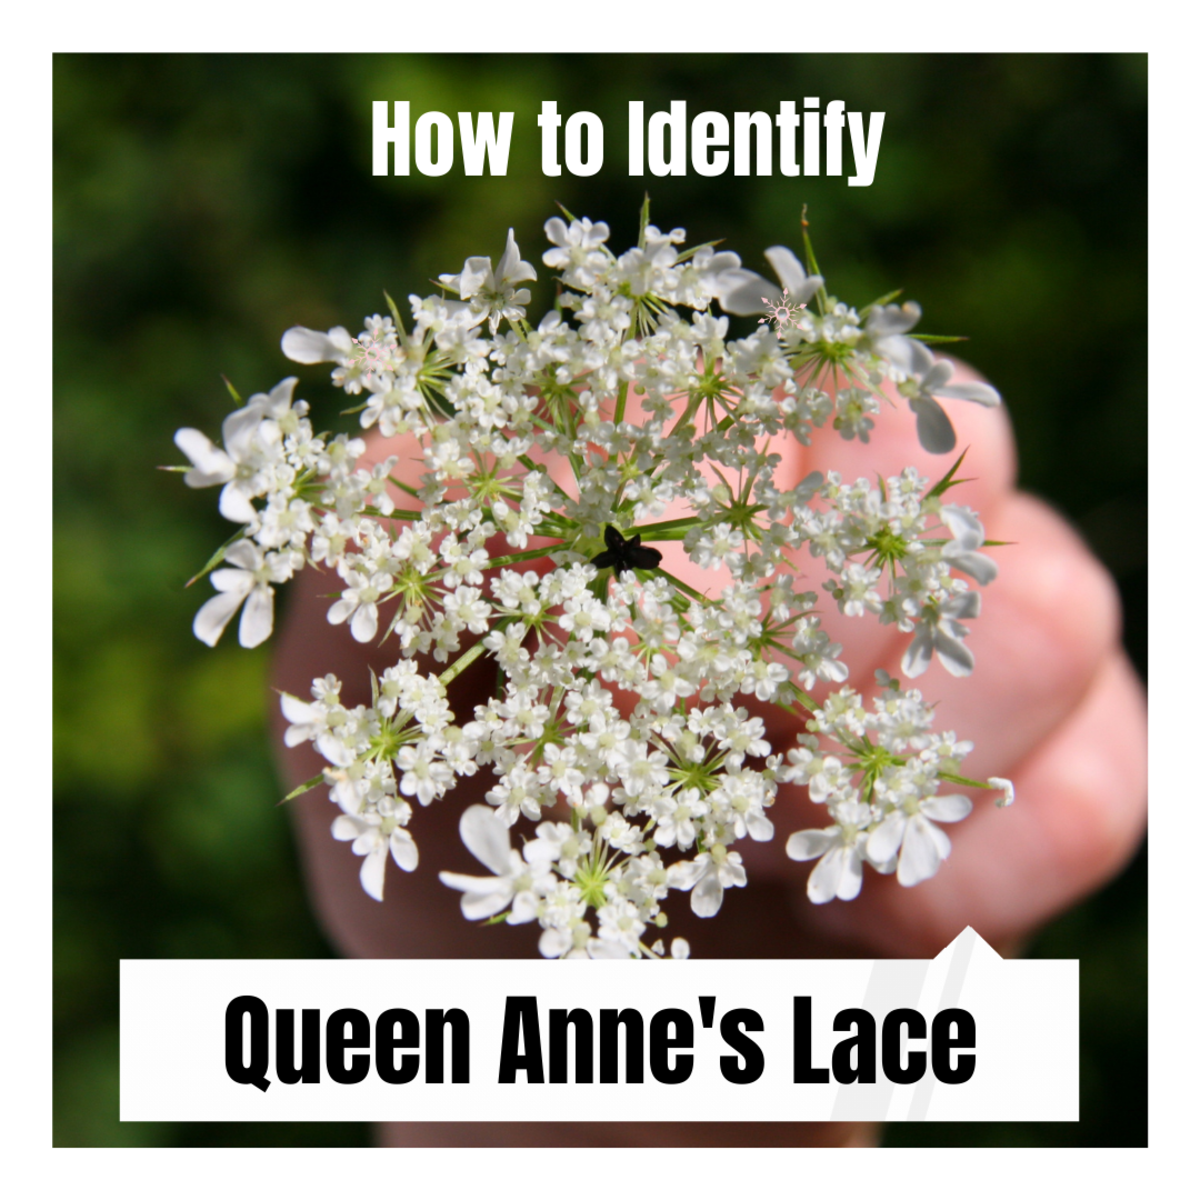 Queen Anne's Lace has a dark purple flower in the center. This dark flower is one way to tell Queen Anne's Lace from potentially dangerous impersonators. 